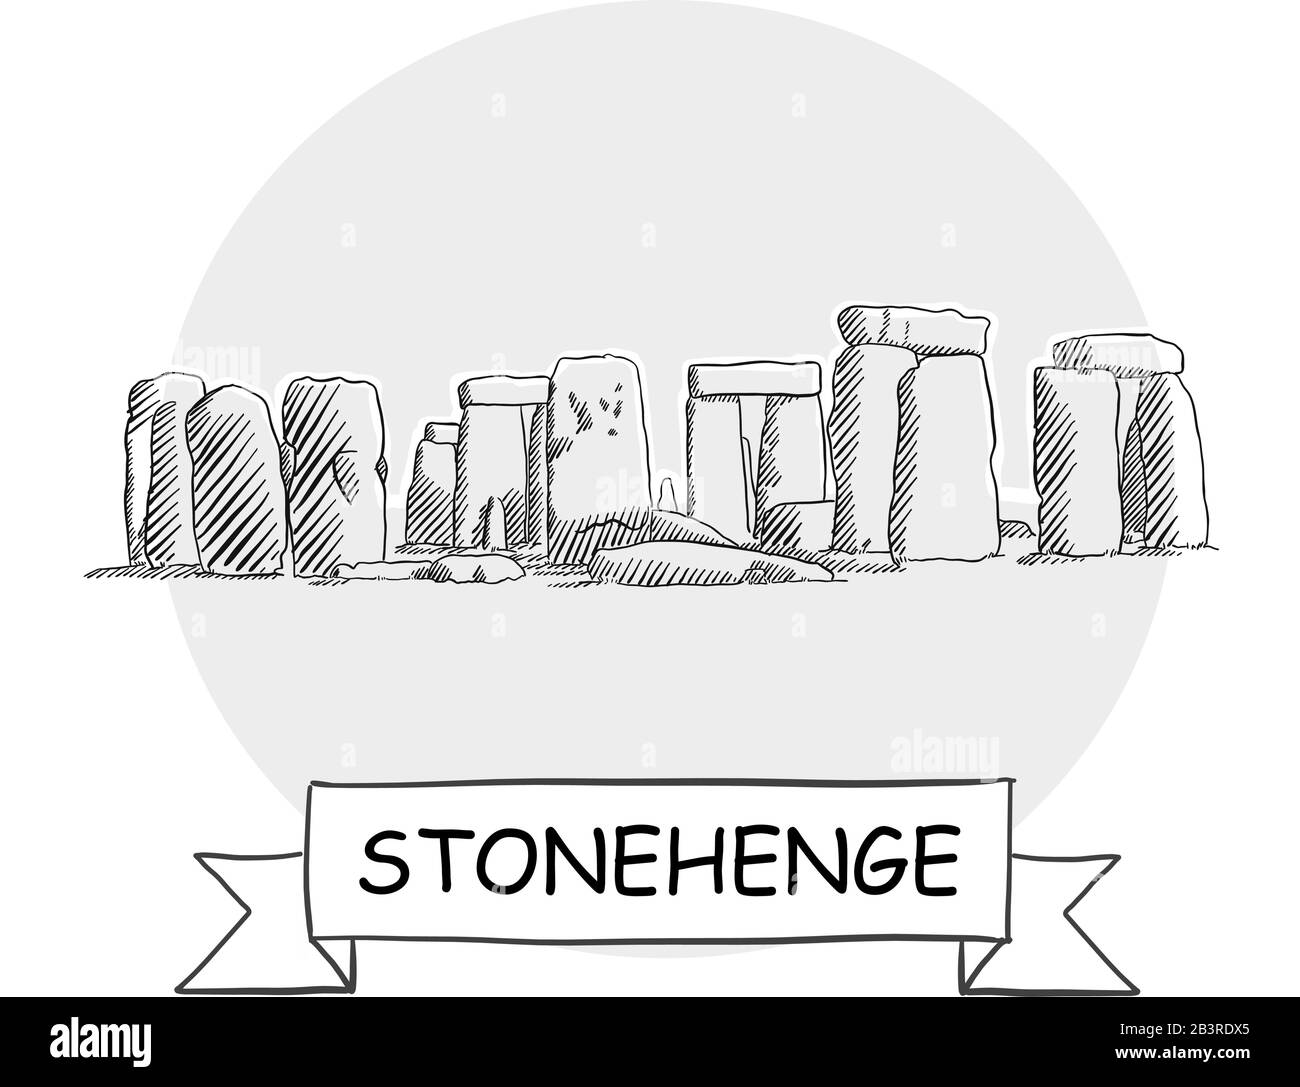 Stonehenge Hand-Drawn Urban Vector Sign. Black Line Art Illustration with Ribbon and Title. Stock Vector